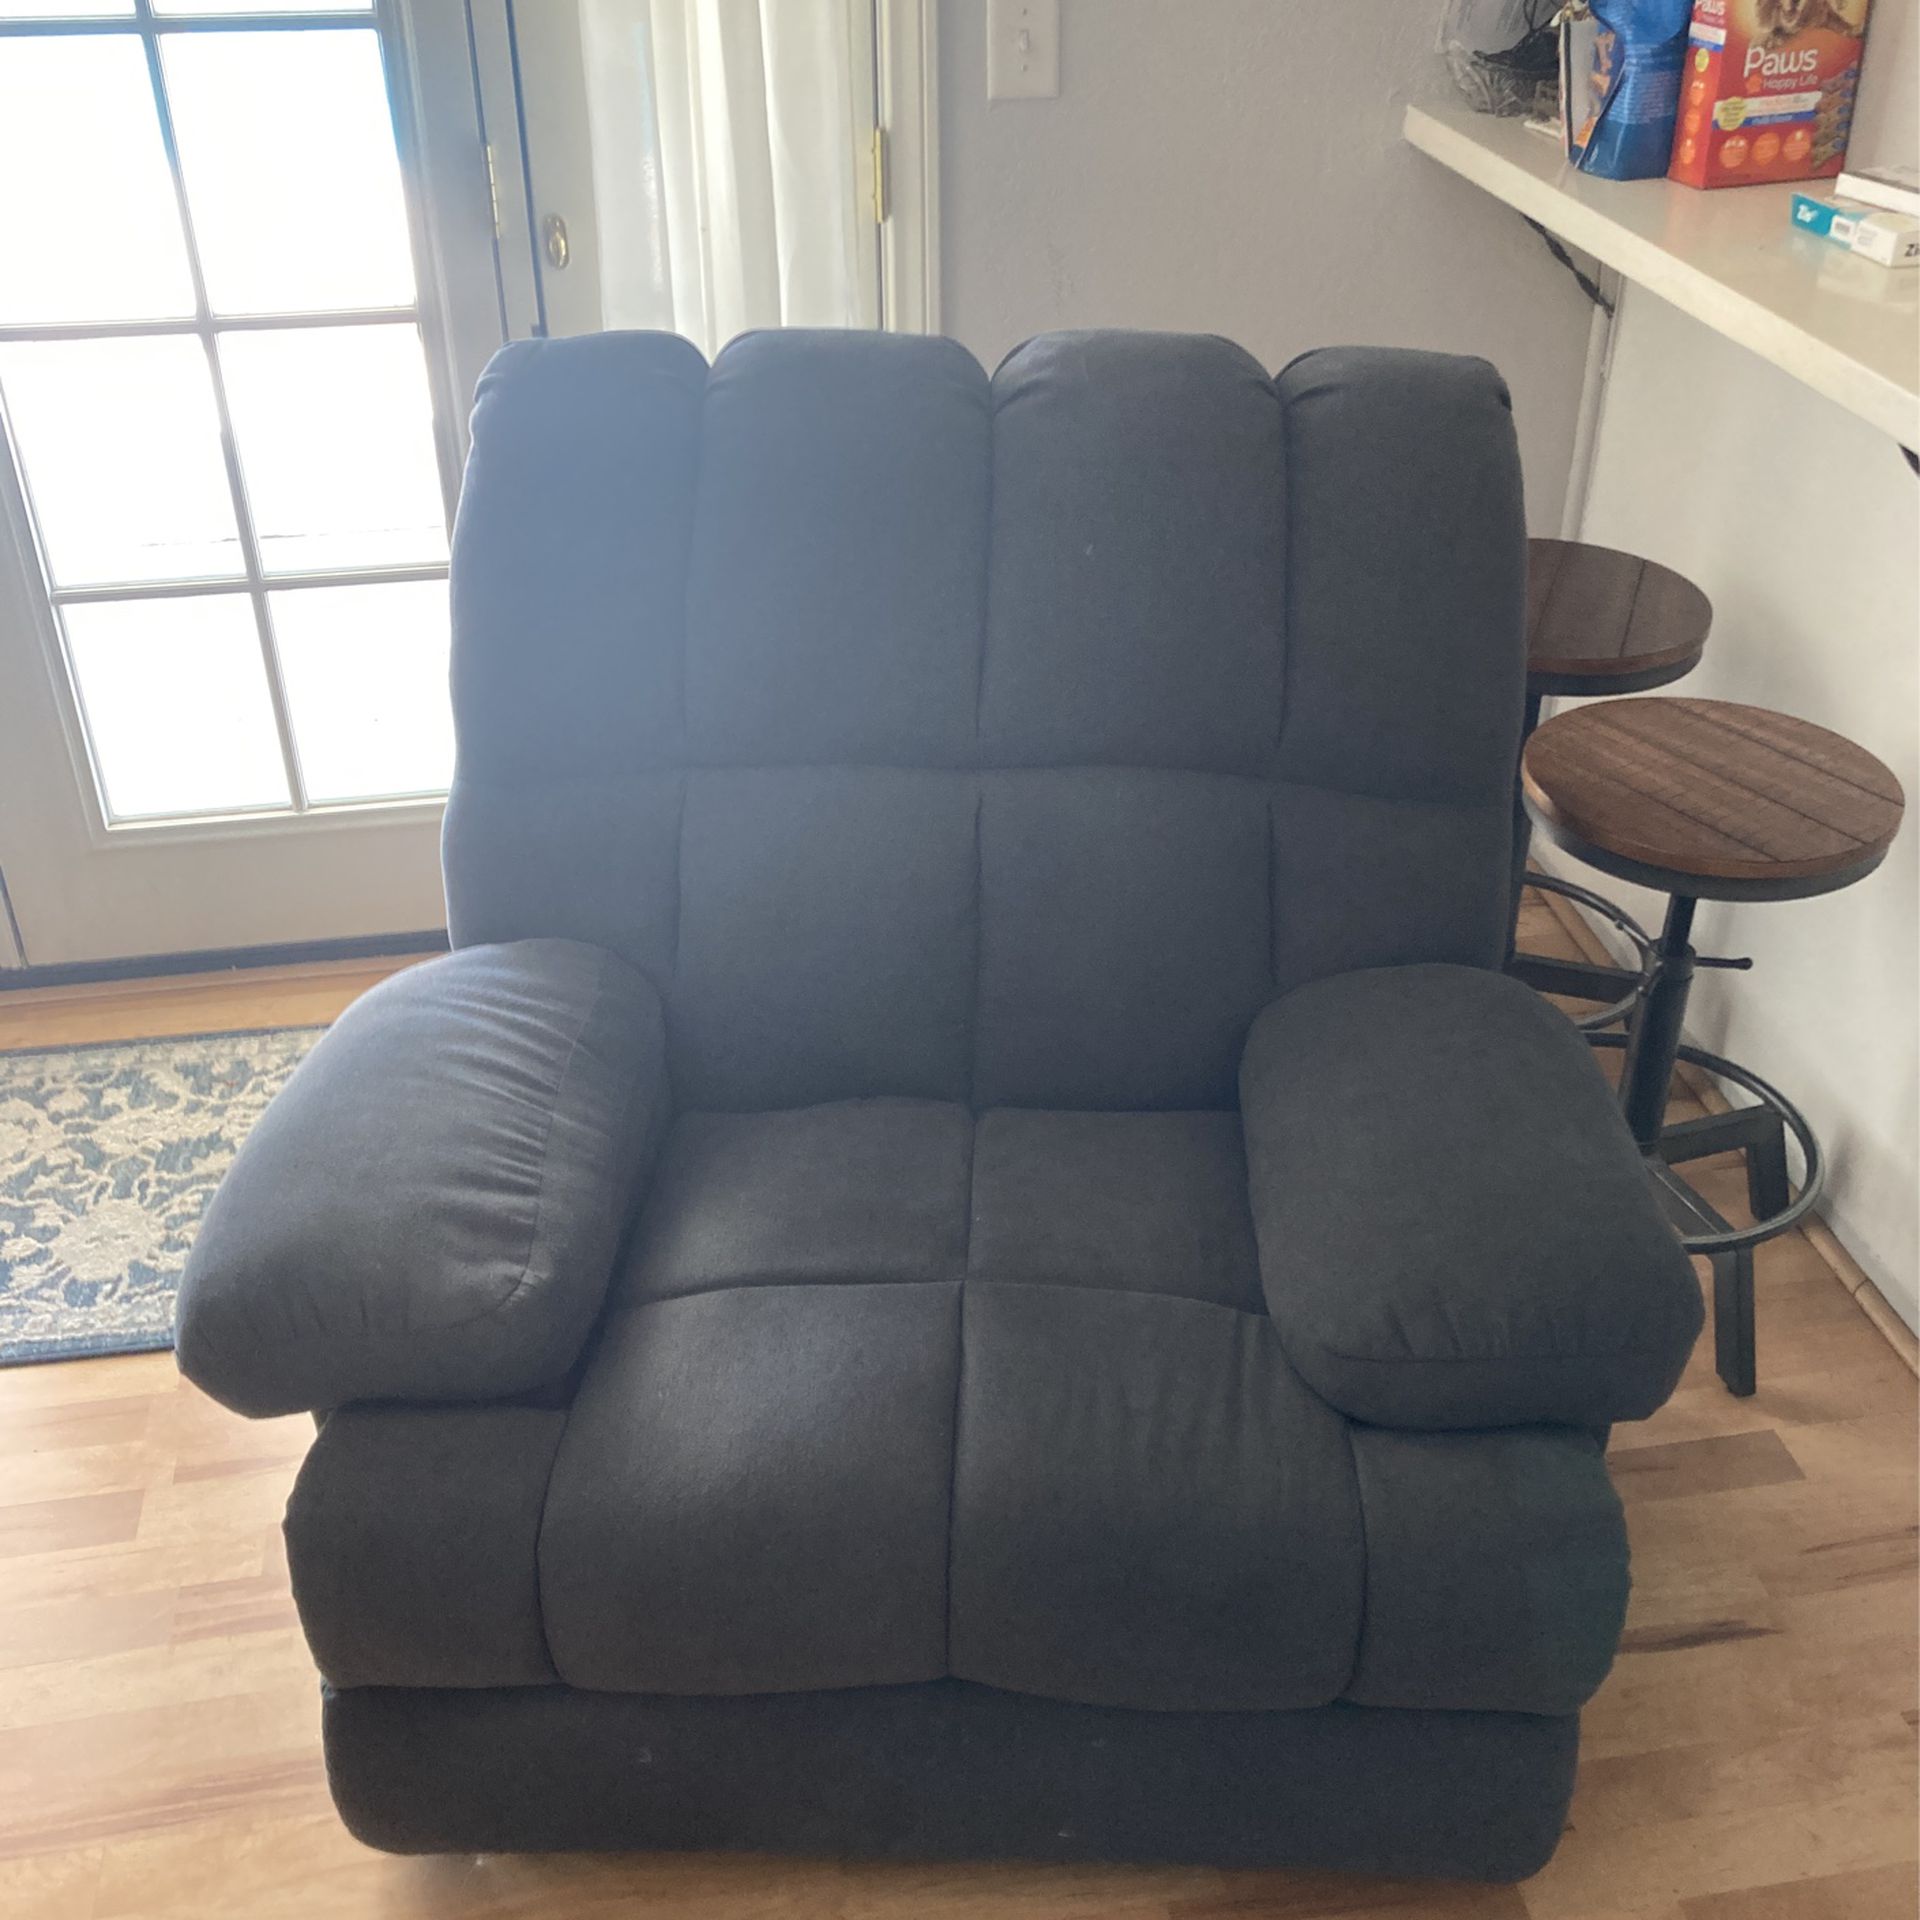 2 Blue Recliners